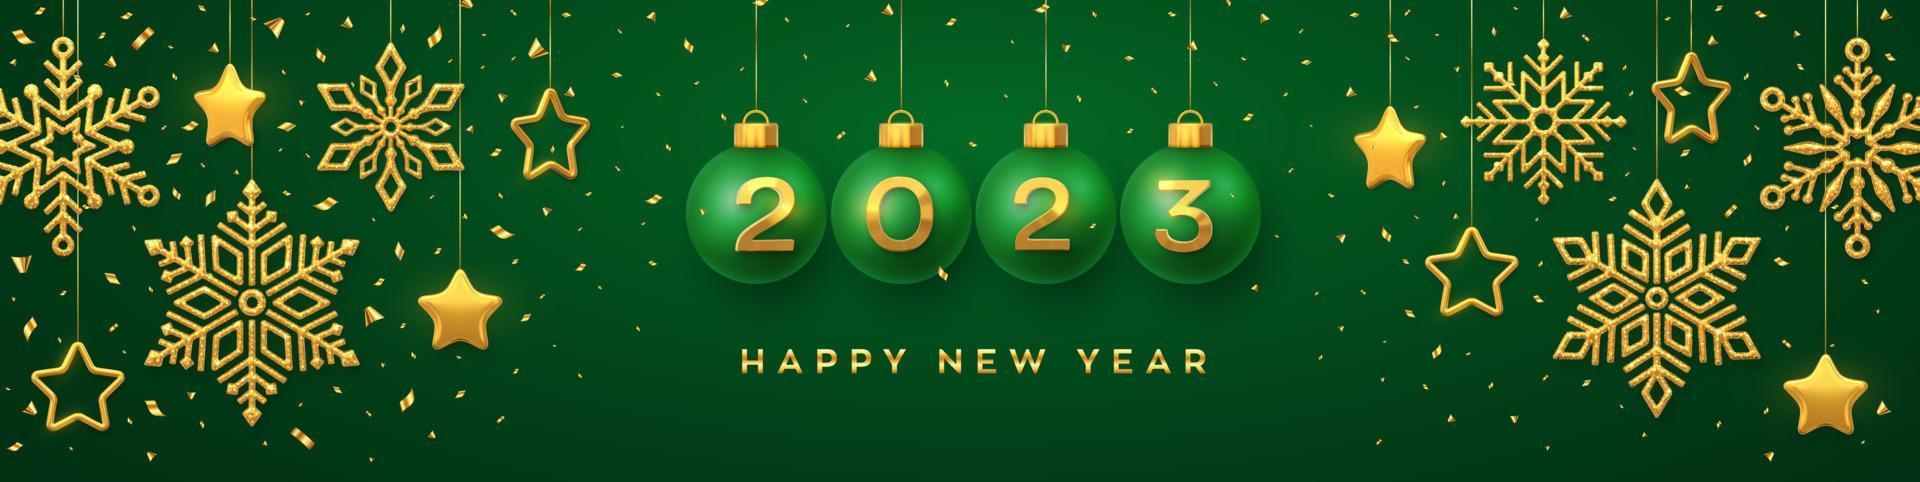 Happy New Year 2023. Hanging green Christmas bauble balls with realistic golden 3d numbers 2023. Golden snowflakes and 3D metallic stars on green background. Holiday banner header. Vector Illustration